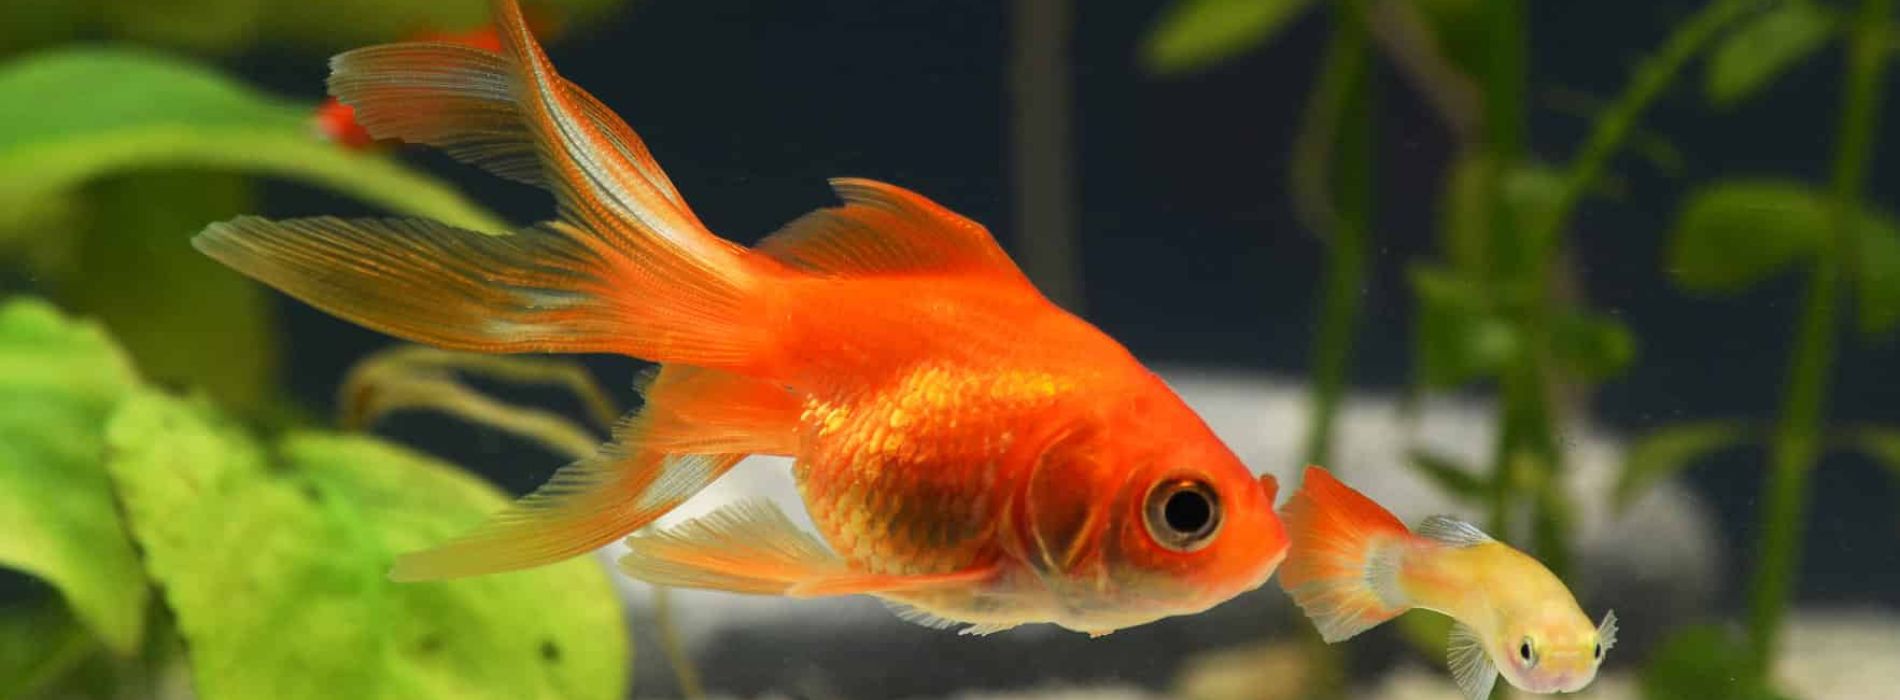 fantail-goldfish-swimming-with-smal-fish